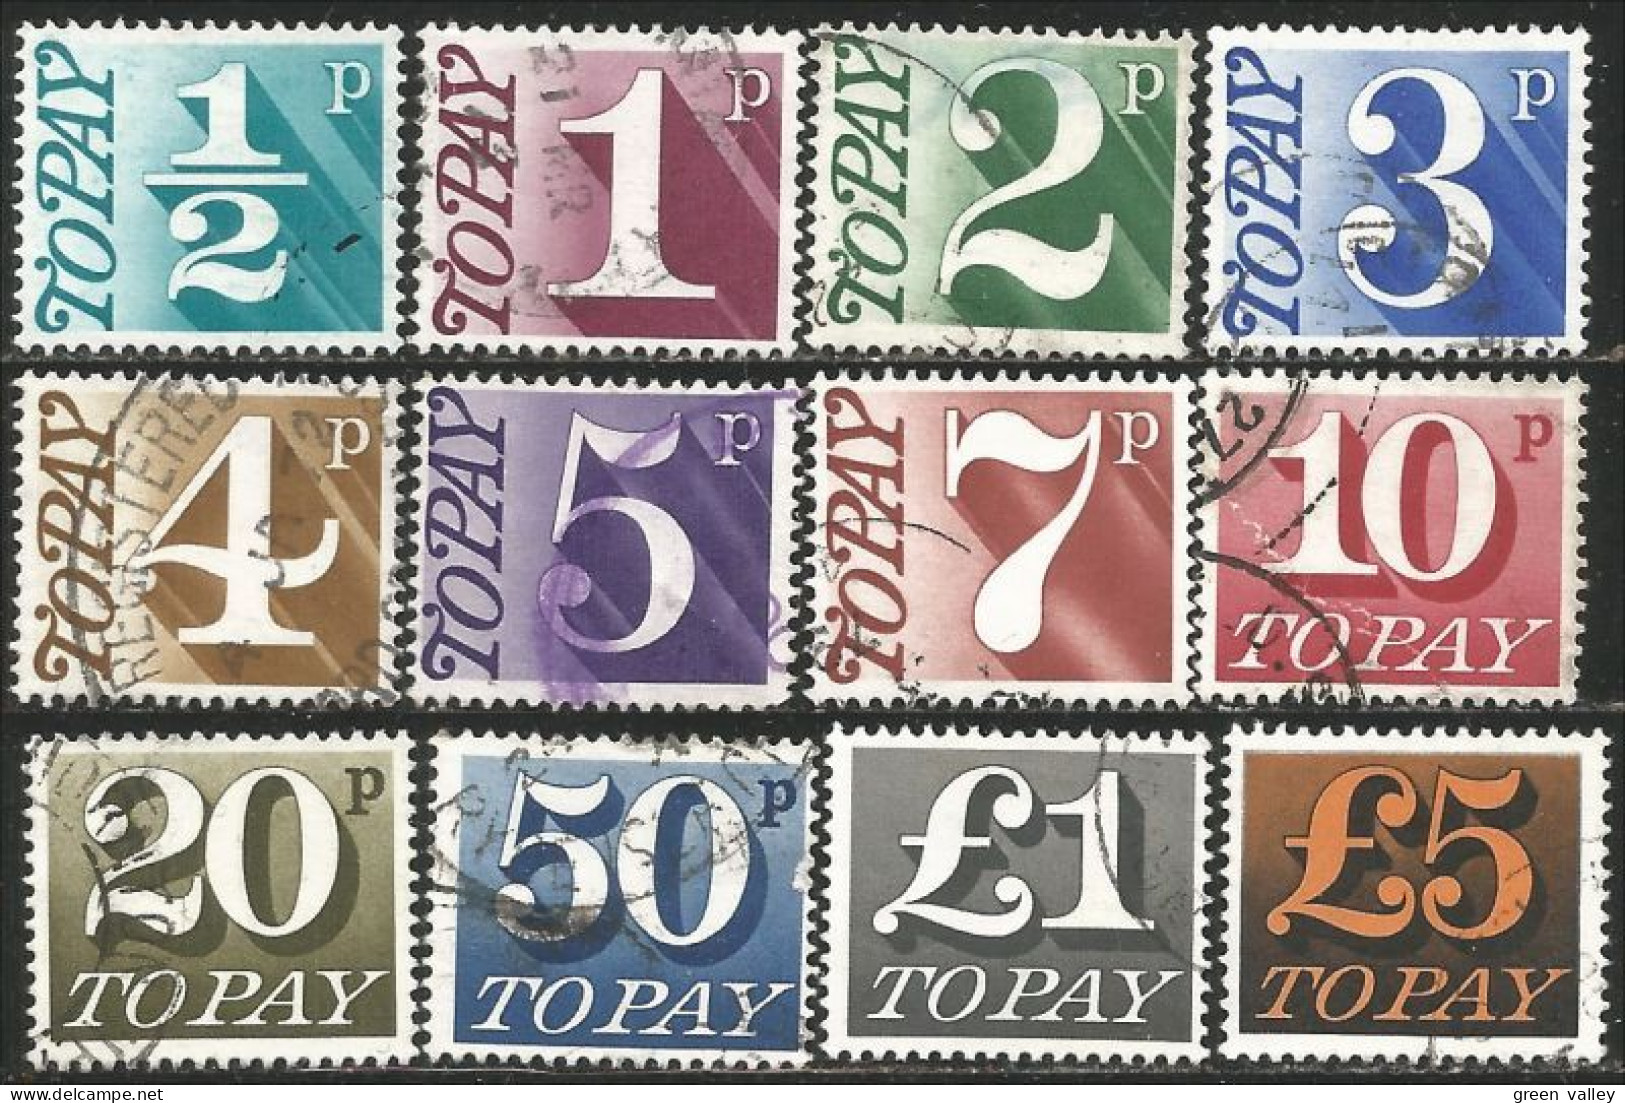 410 G-B 1970-75 Postage Dues Lightly Cancelled (GB-239) - Postage Due